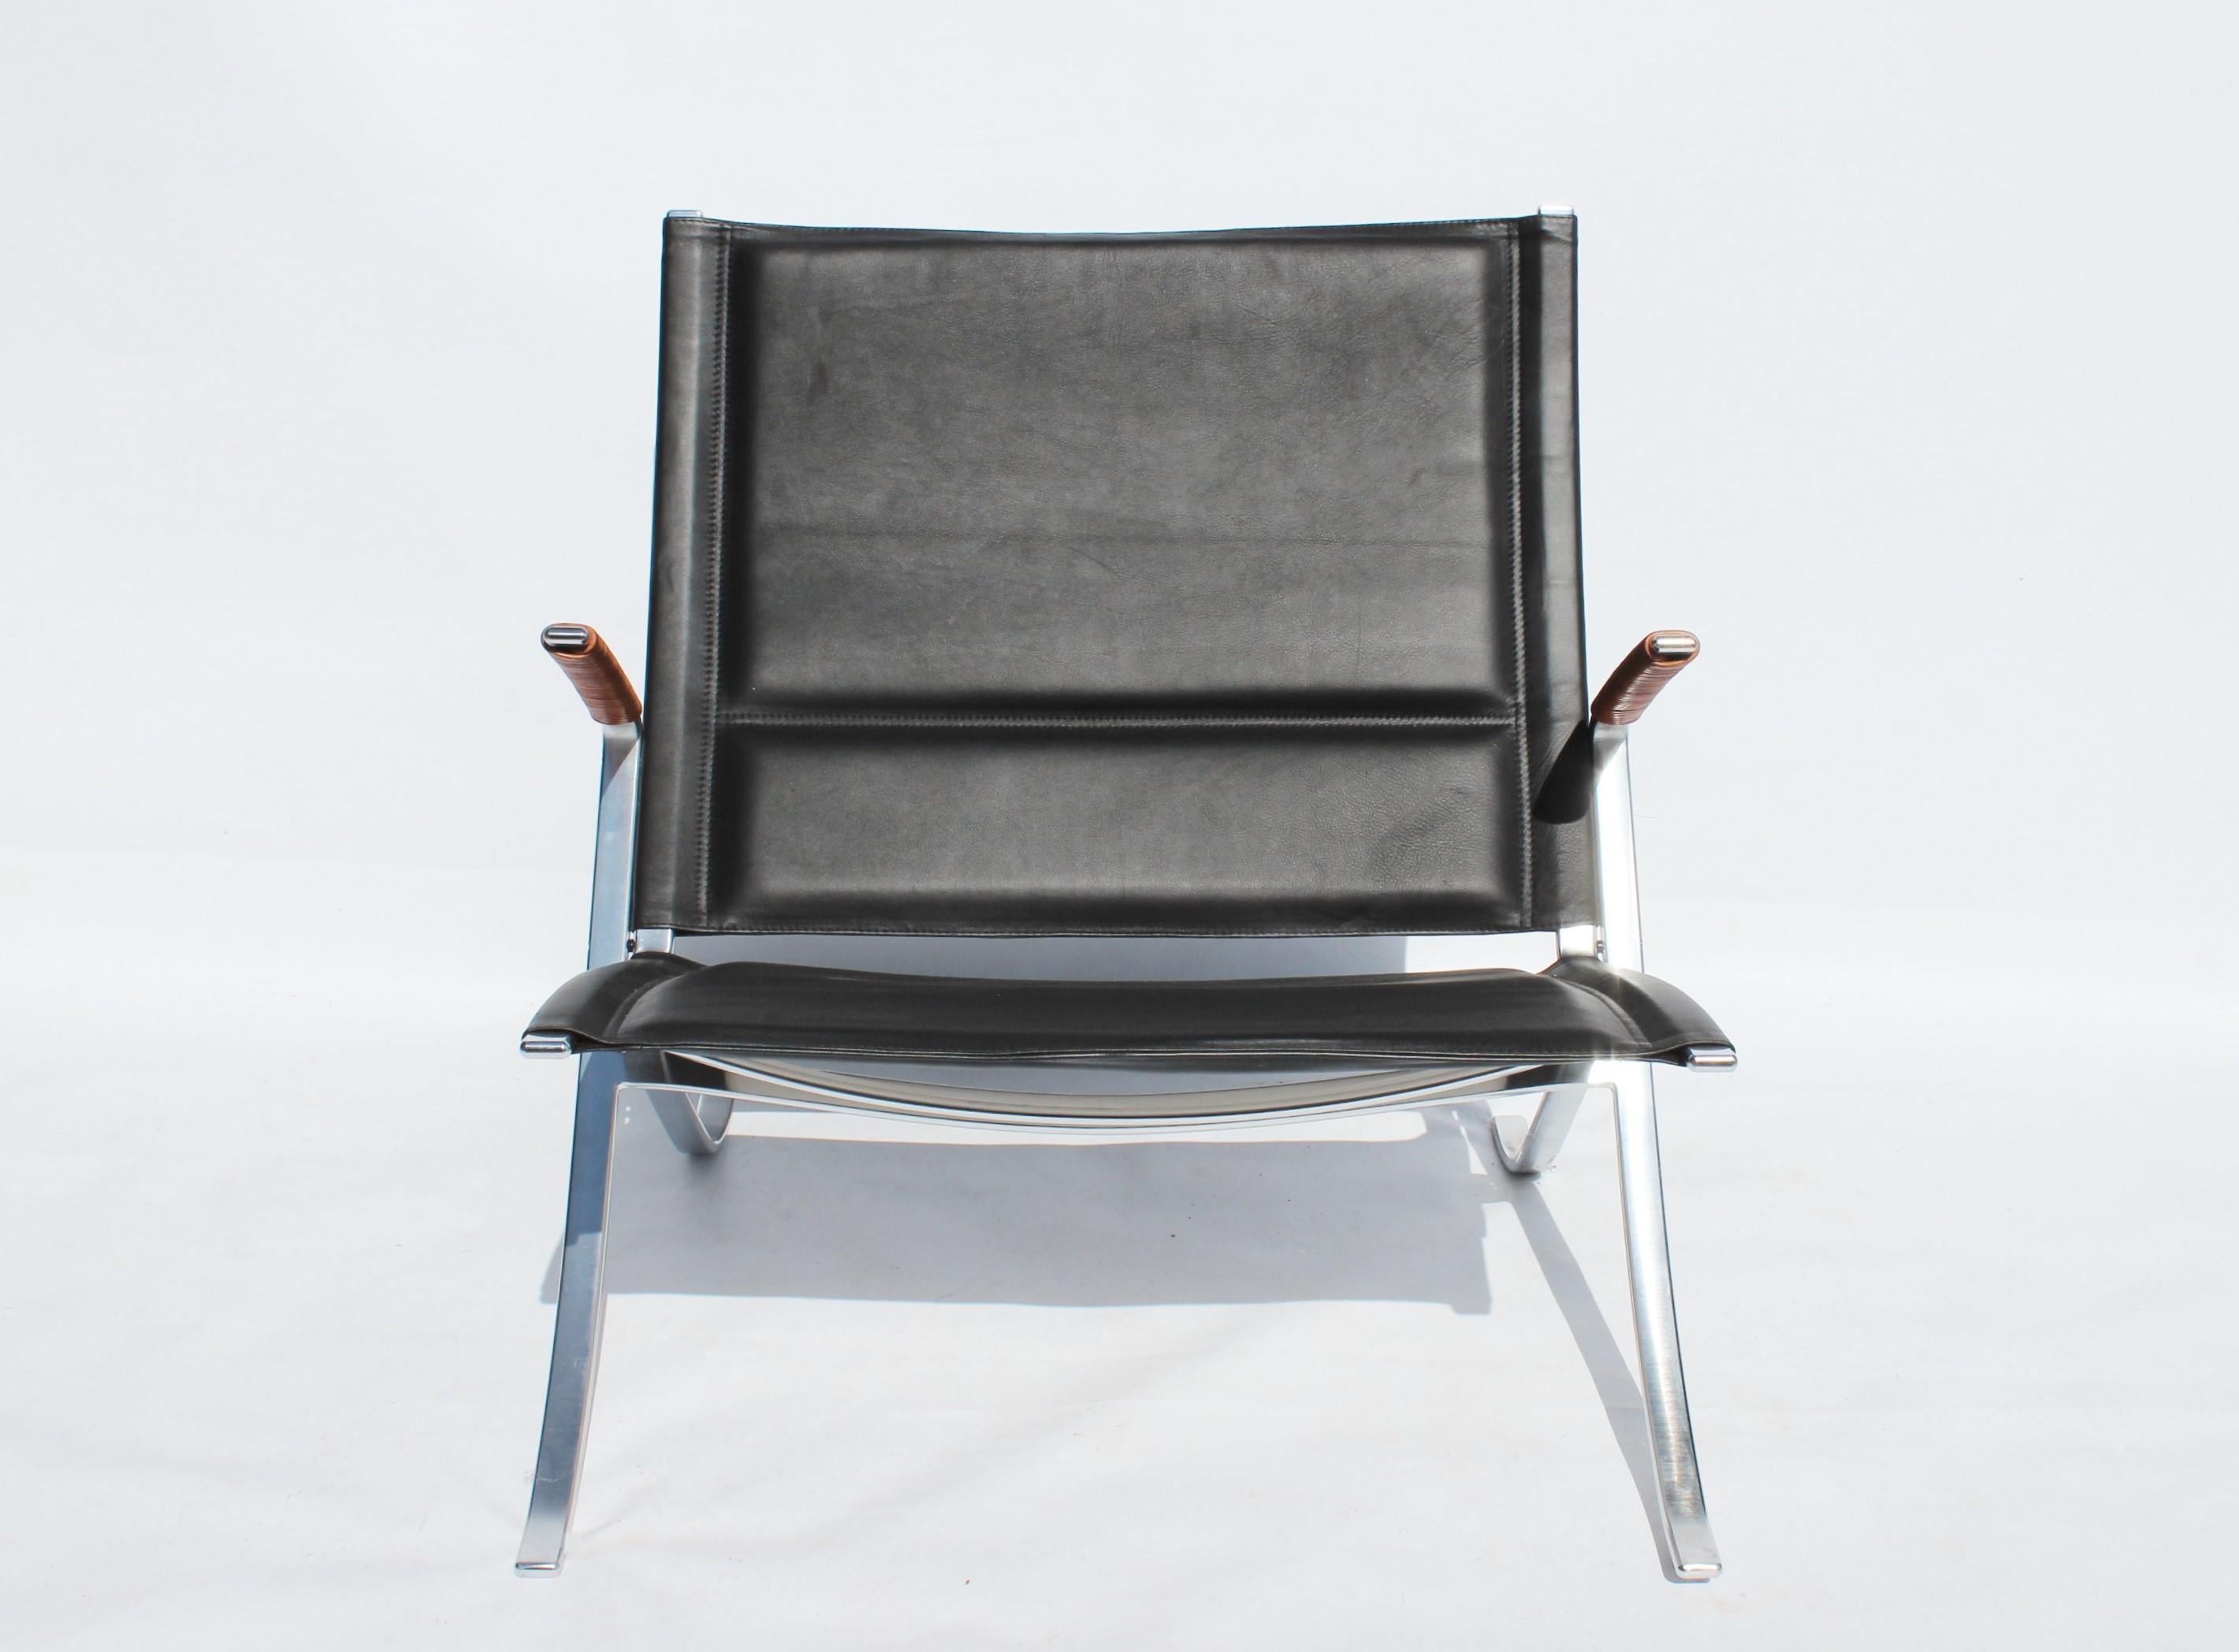 Easy chair, model FK82 - X-chair, designed by Preben Fabricius and Jørgen Kastholm in 1968 and manufactured by Lange Production. The chair is upholstered with black leather and is in good condition.